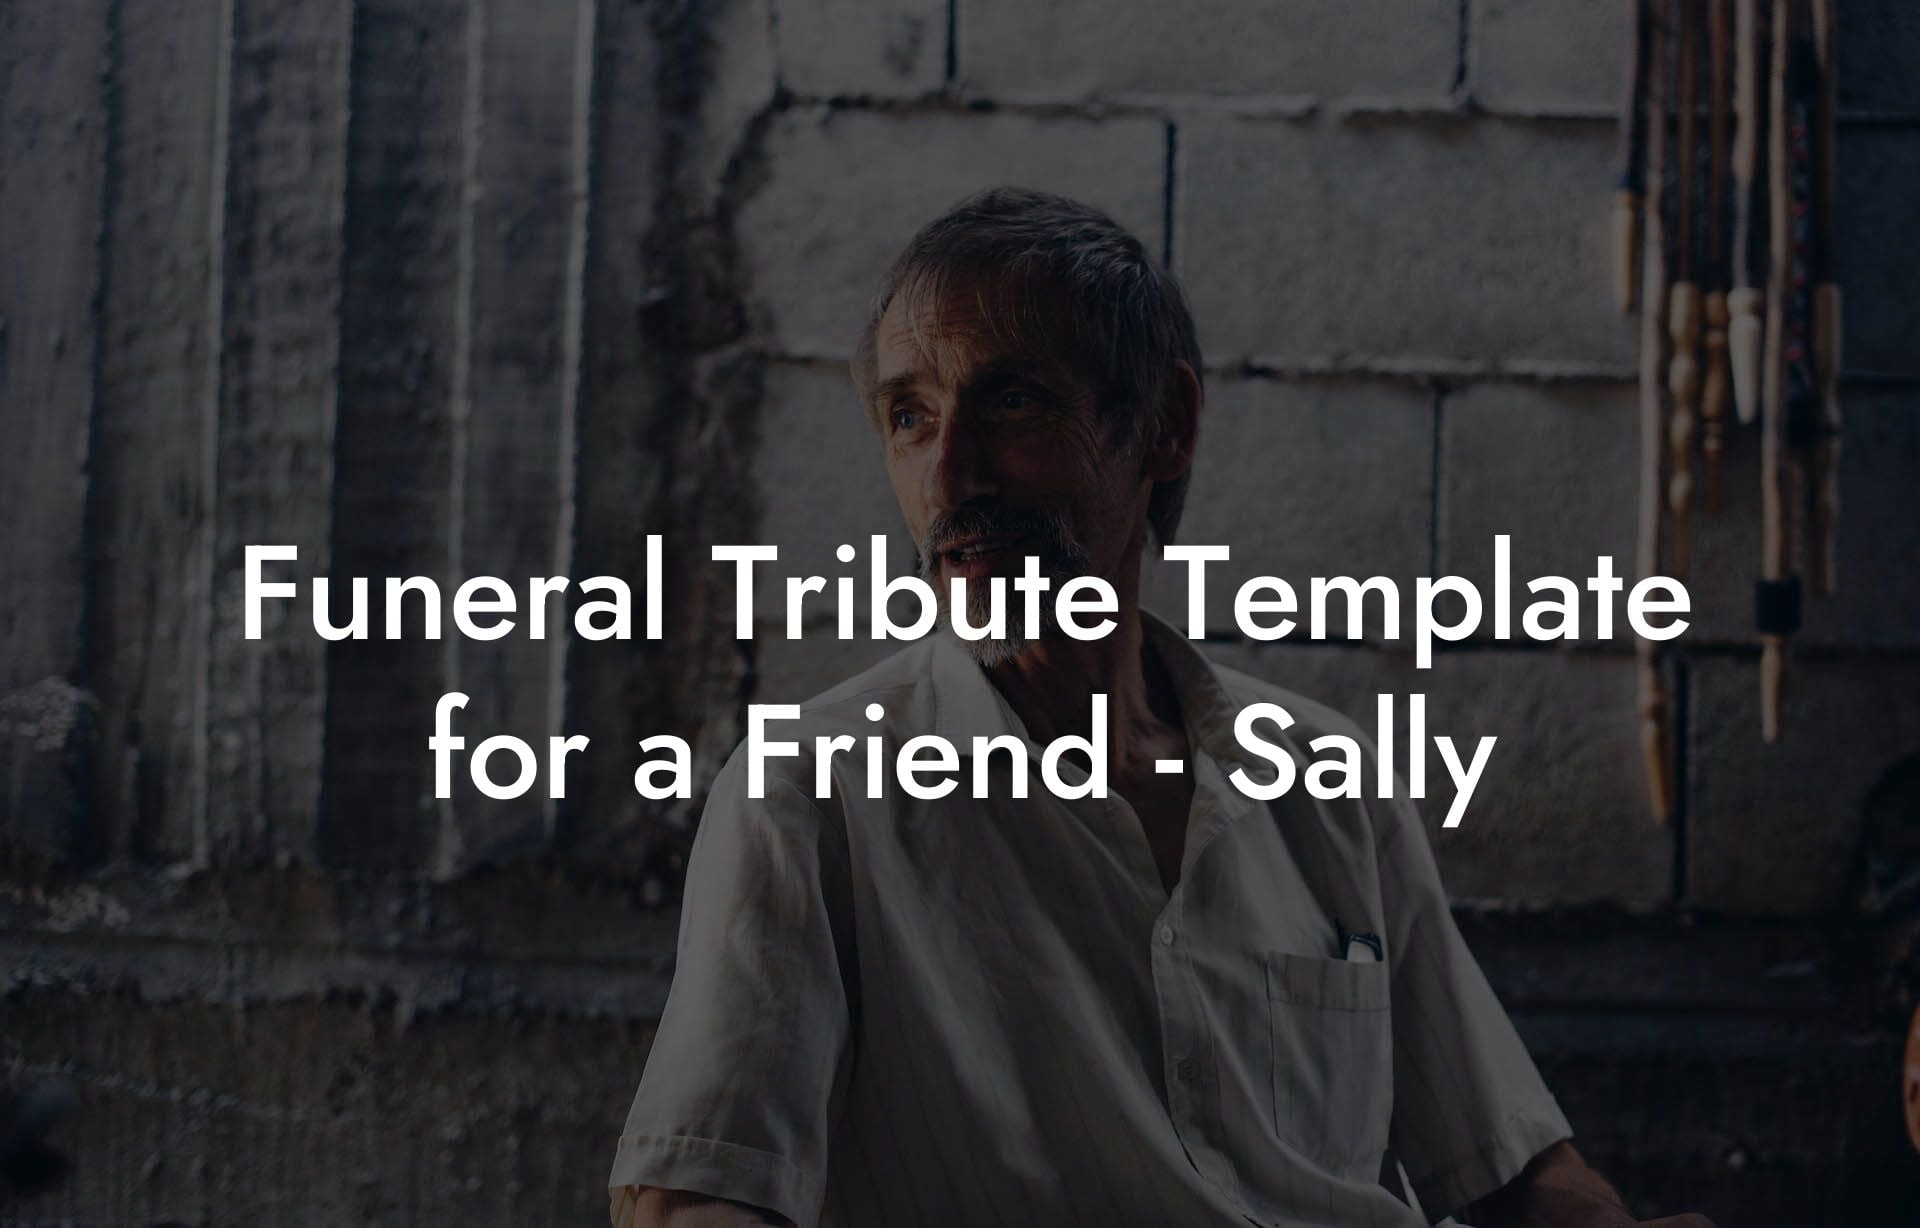 Funeral Tribute Template for a Friend - Sally